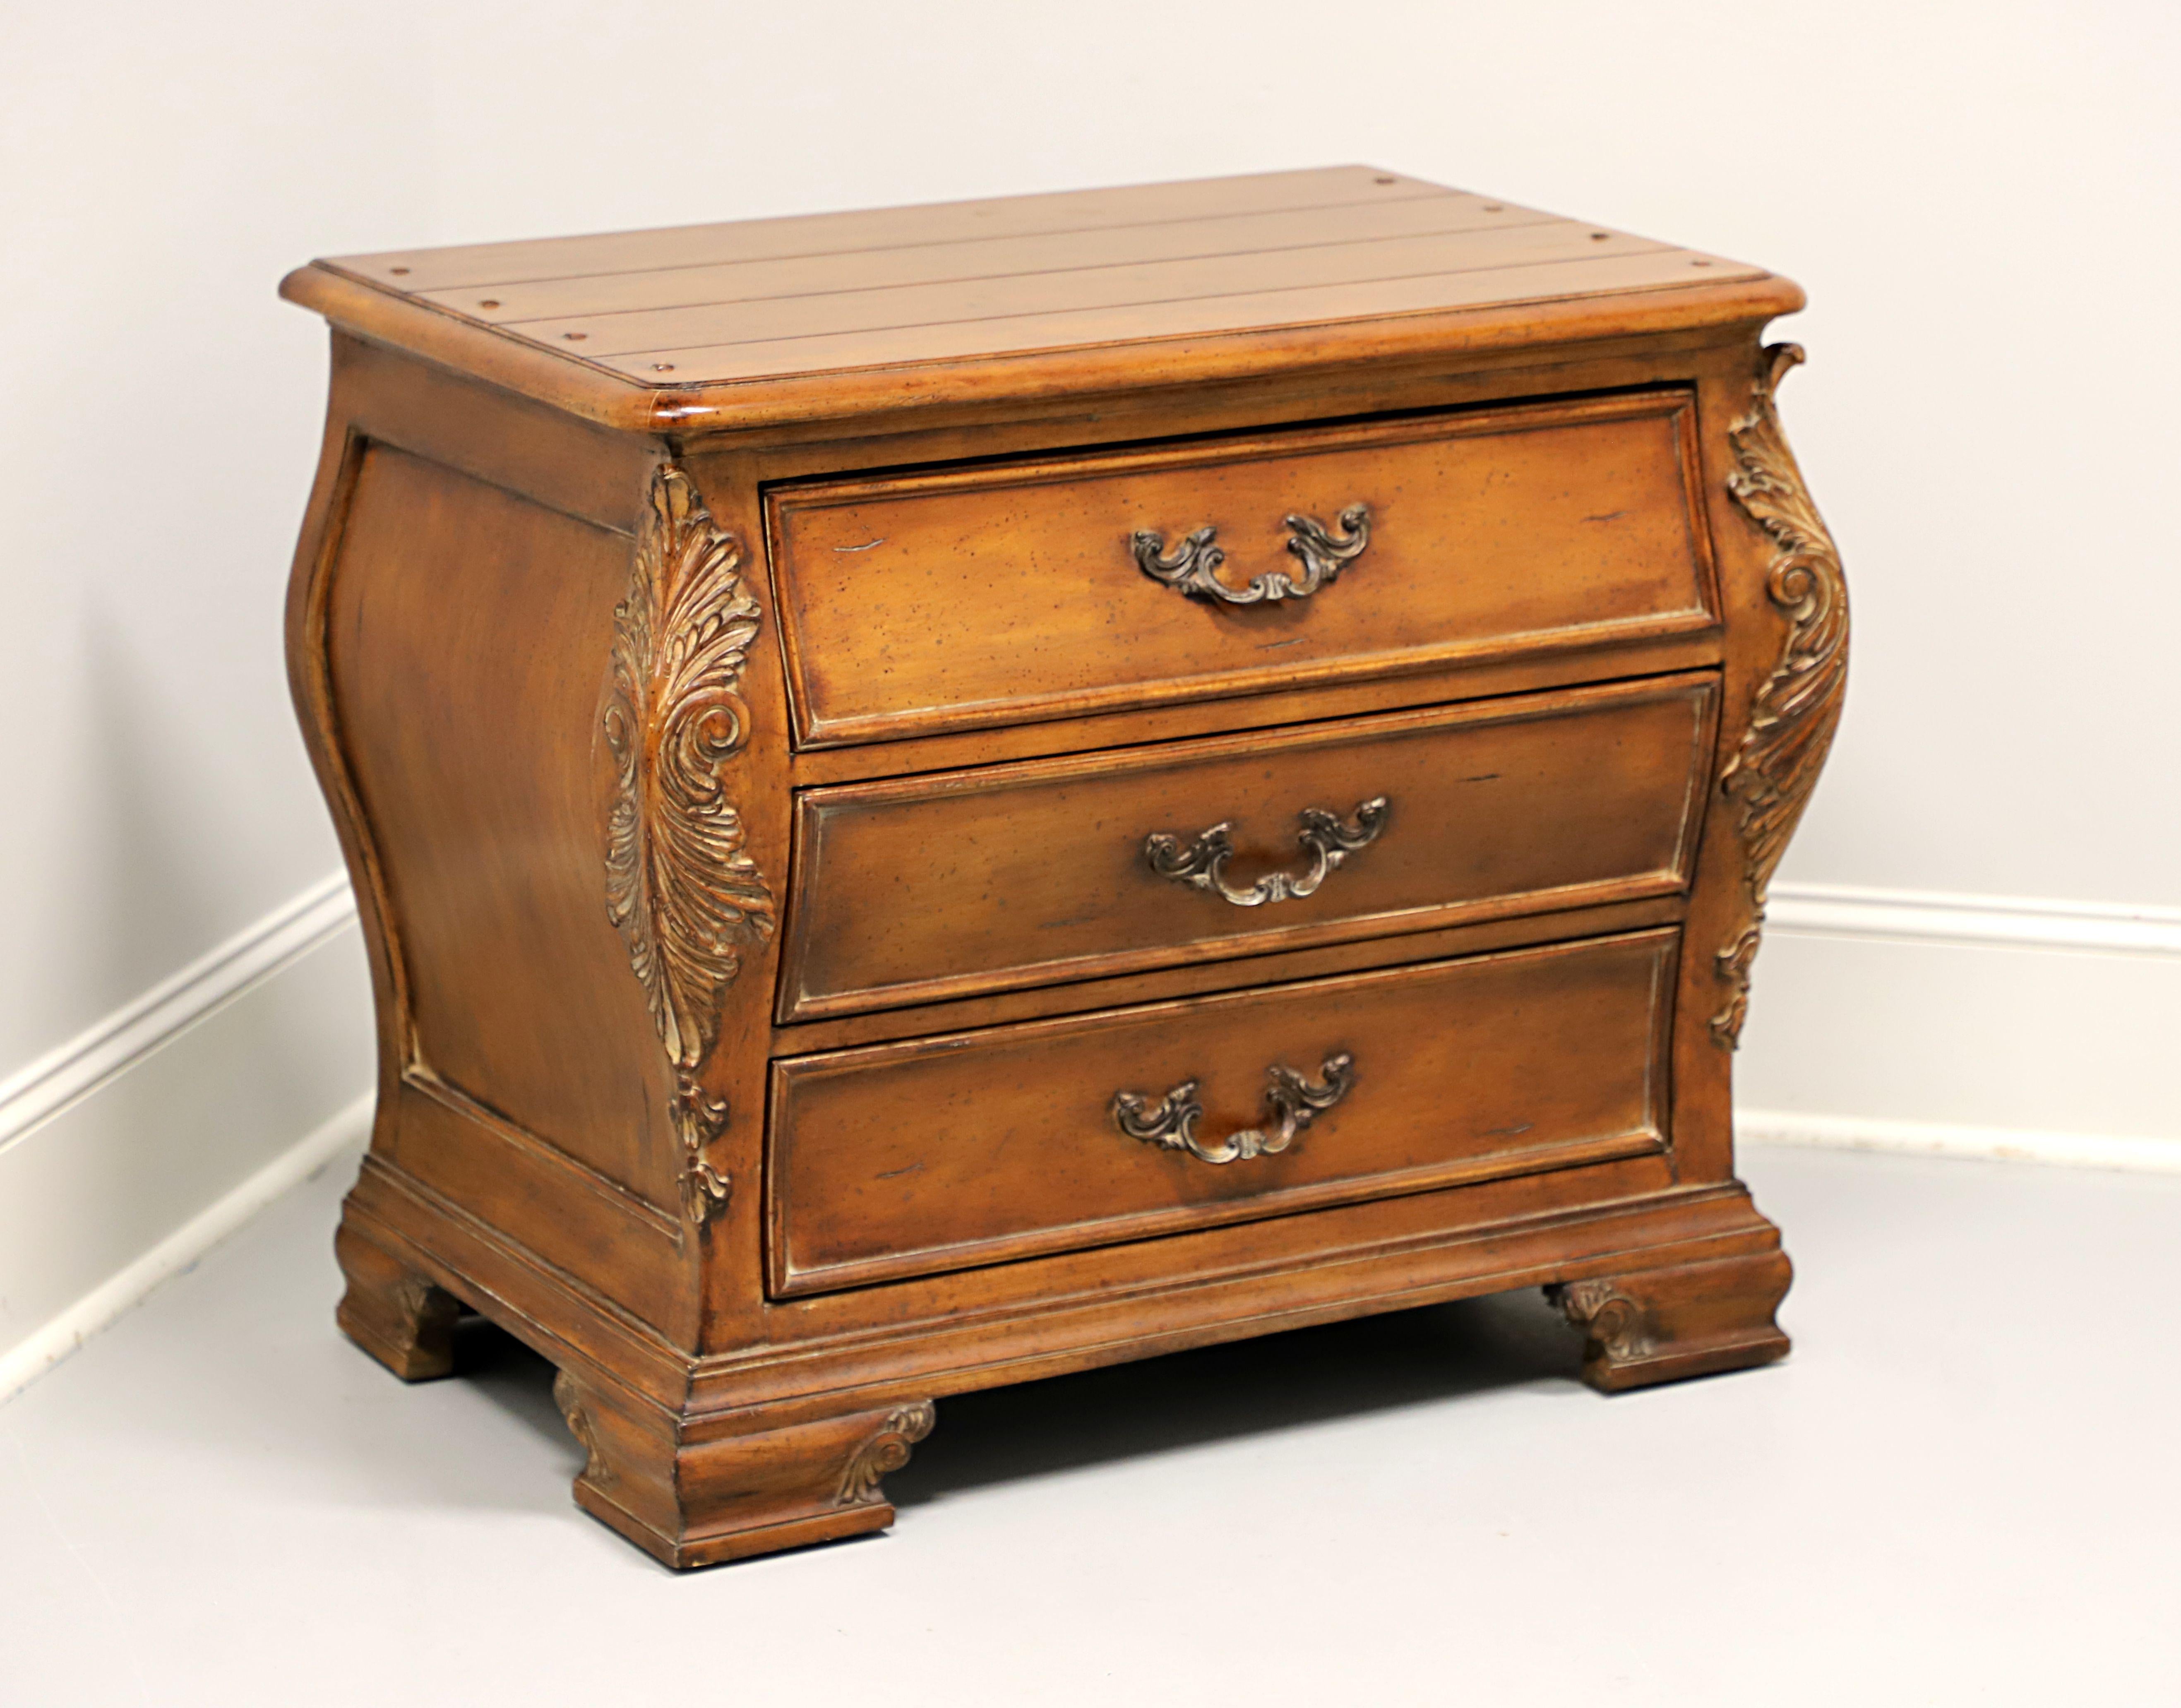 THOMASVILLE Chateau Provence French Country Nightstand Bedside Chest - B 2